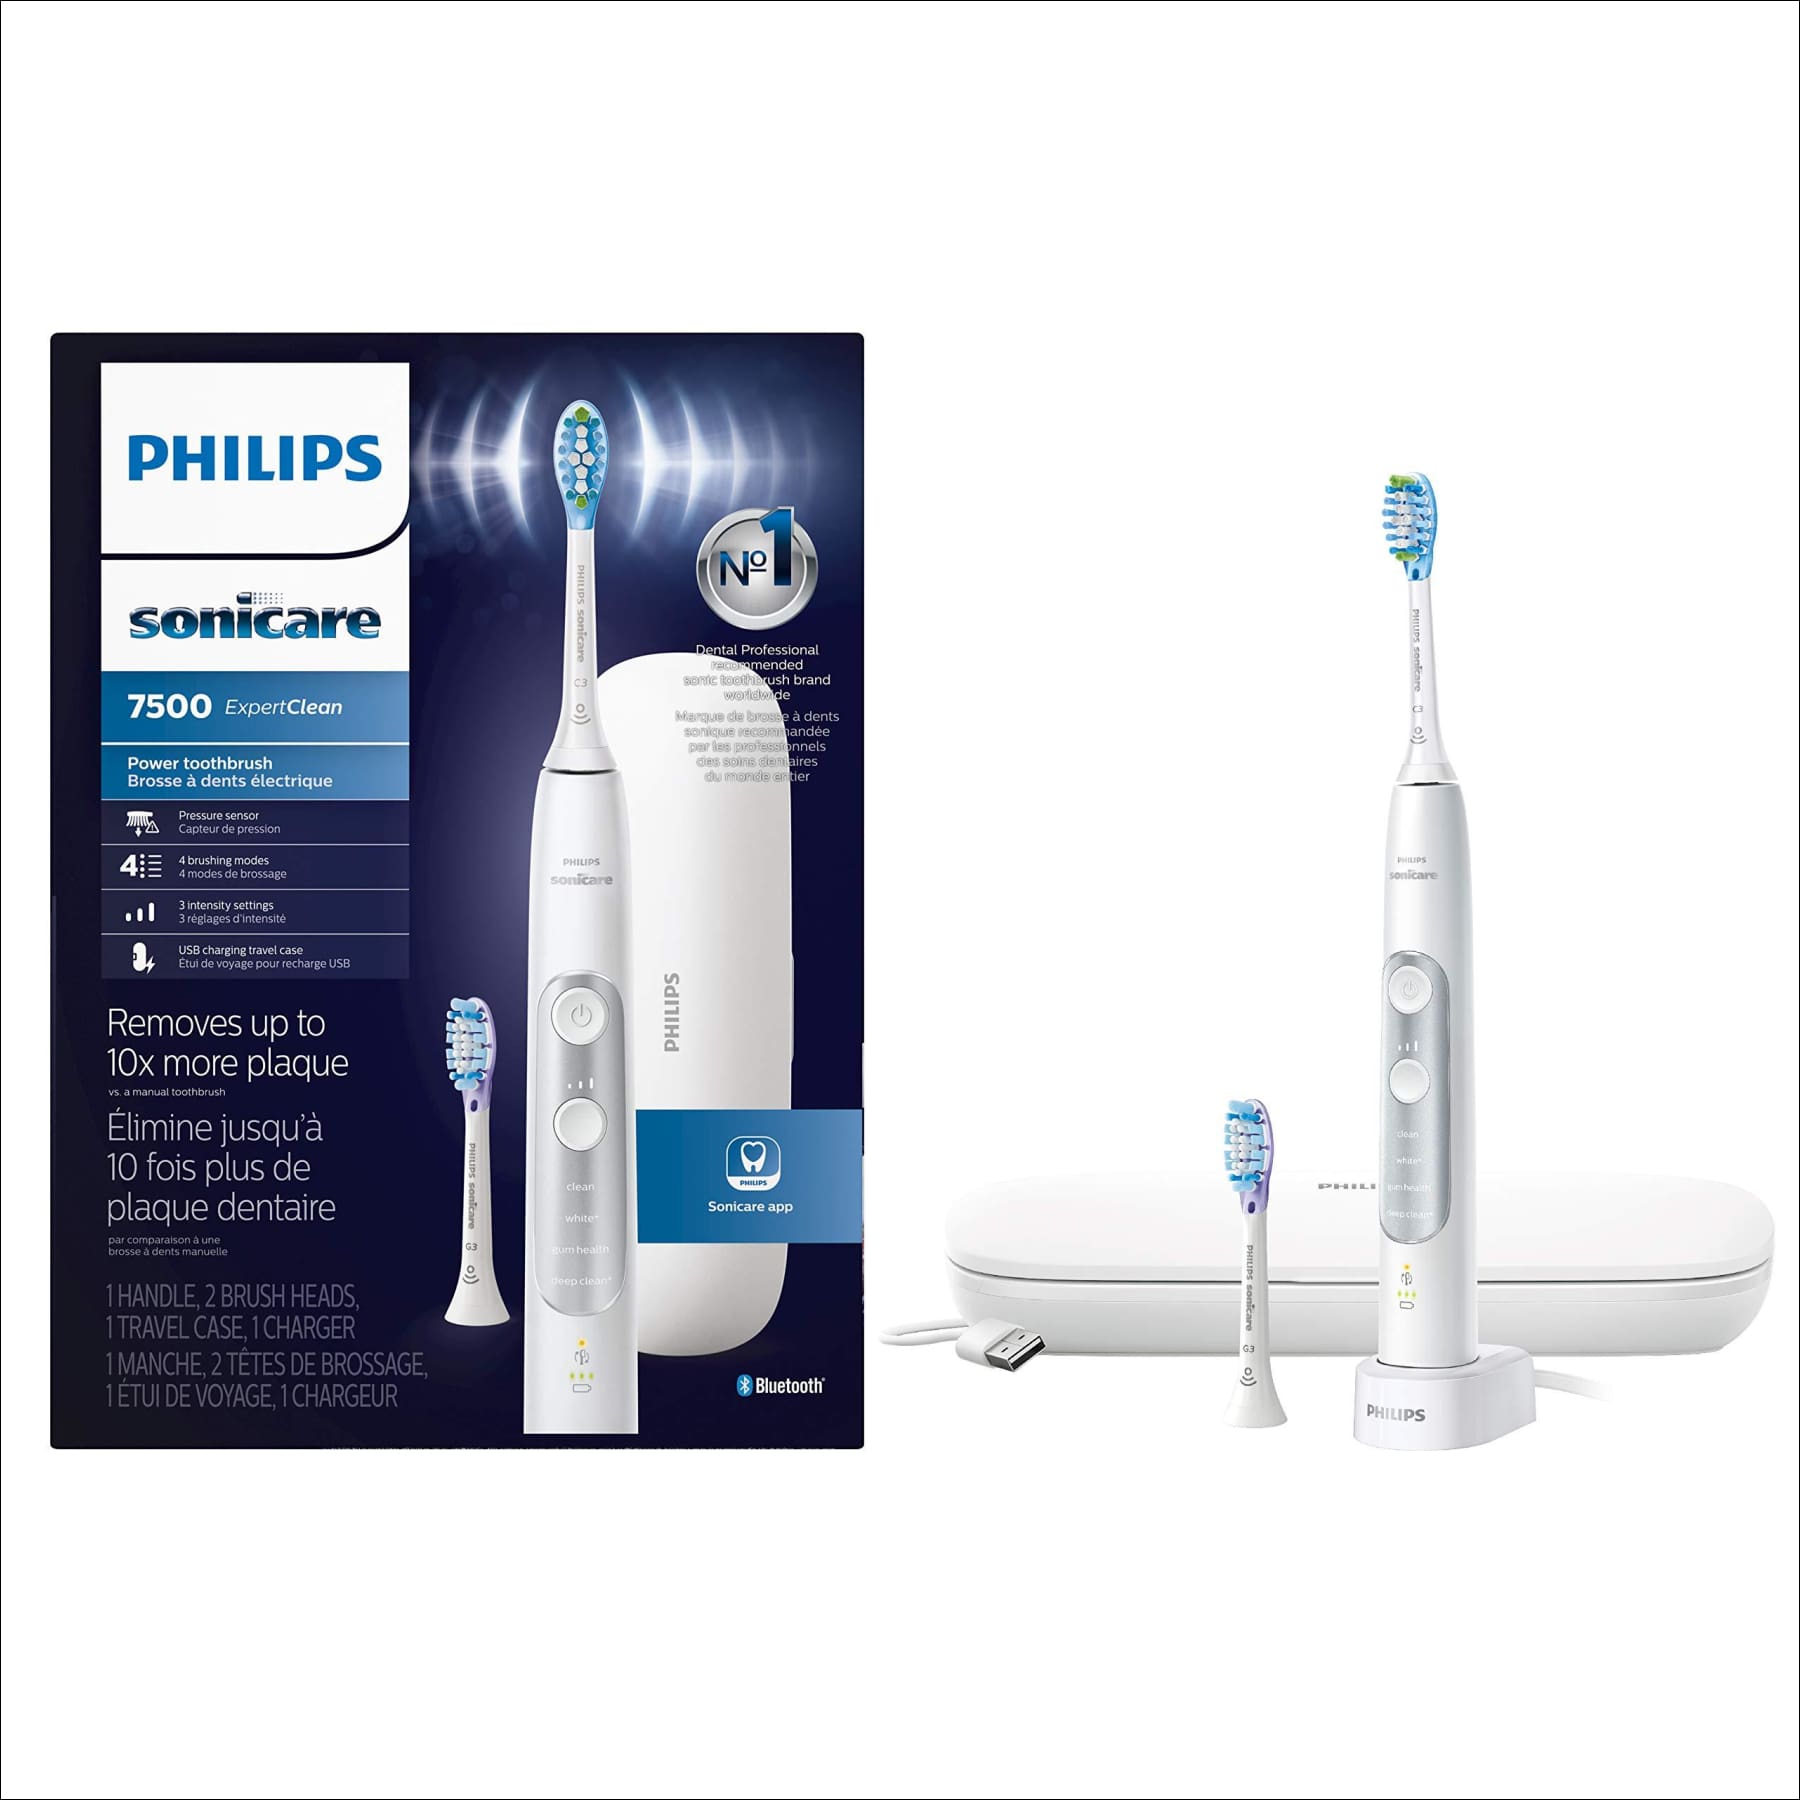 Philips Sonicare ExpertClean 7500 Bluetooth Rechargeable Electric Toothbrush for Adults, White HX9690/06 - image 1 of 7